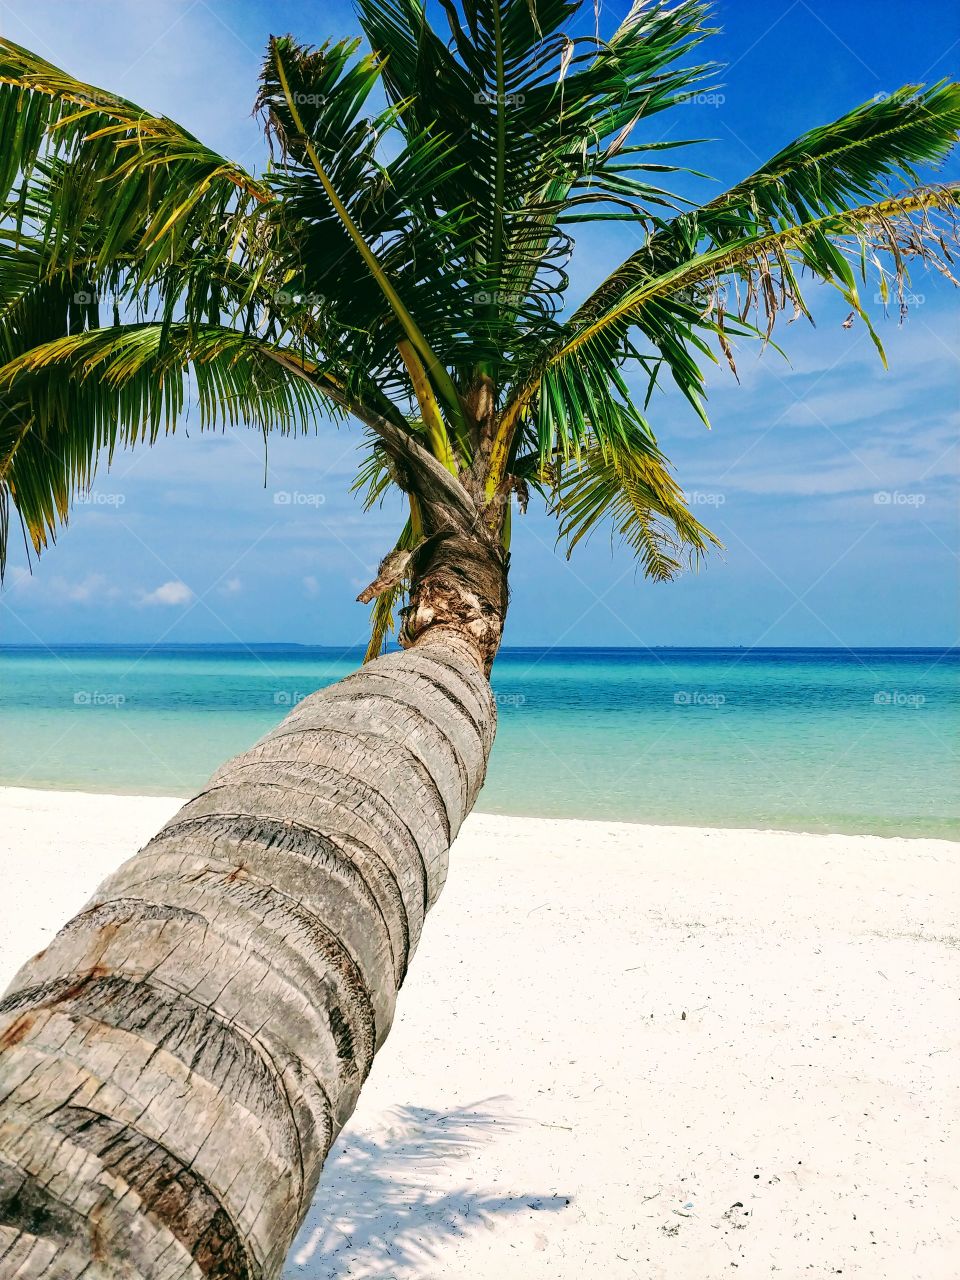 The view of the palm tree on Pagoda Beach on Koh Rong island in Cambodia